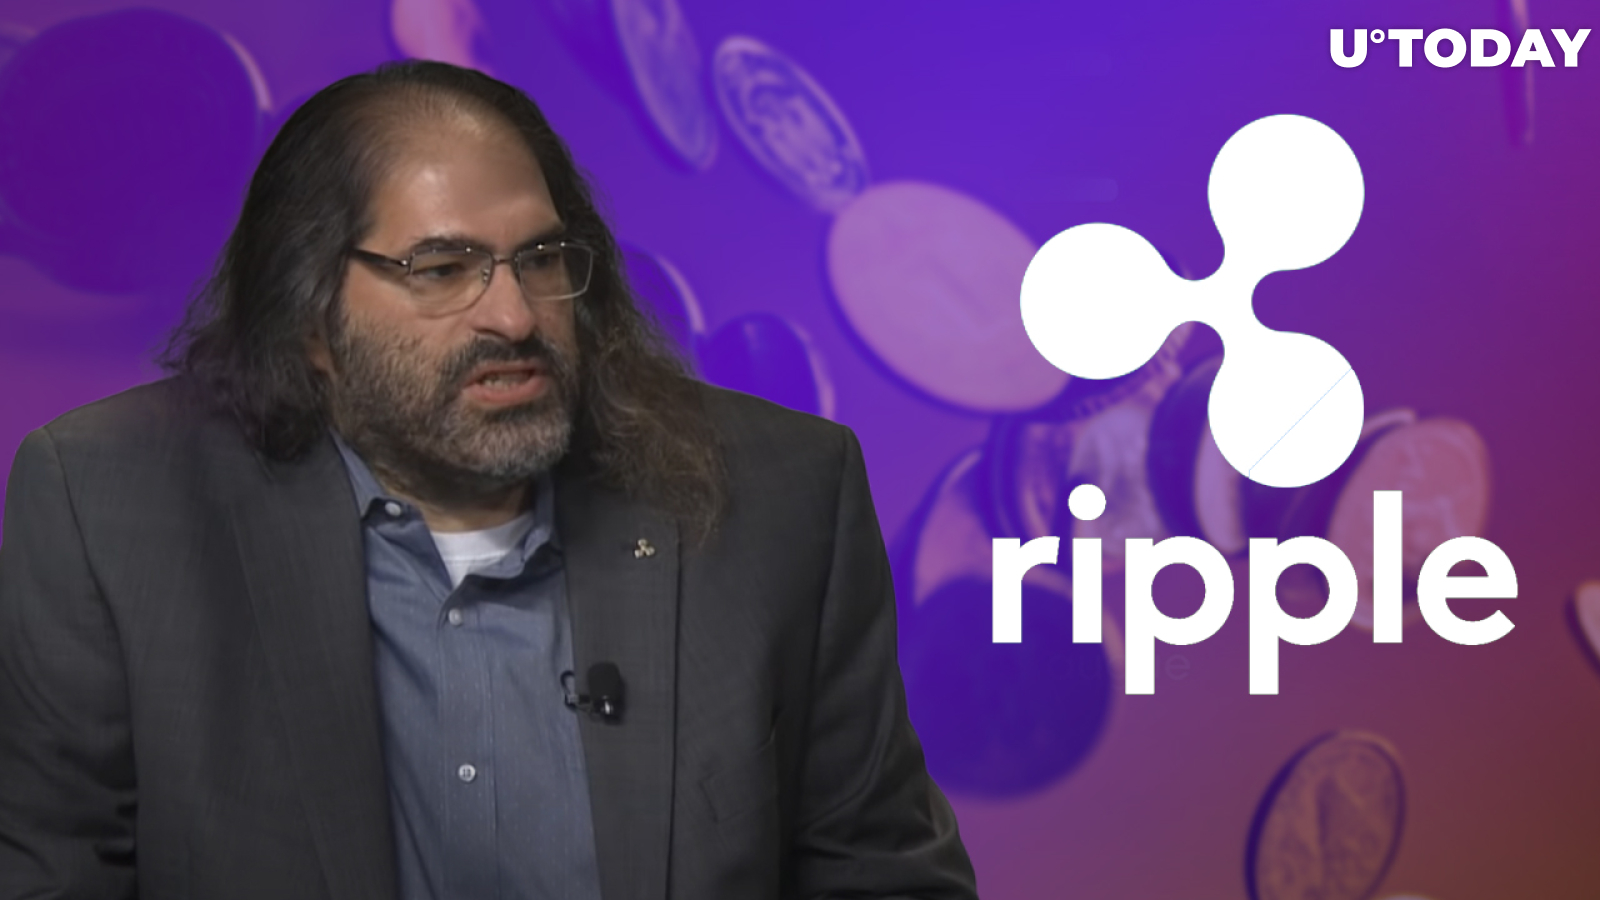 Here’s How Much Crypto You Must Have to Work for Ripple: Company CTO